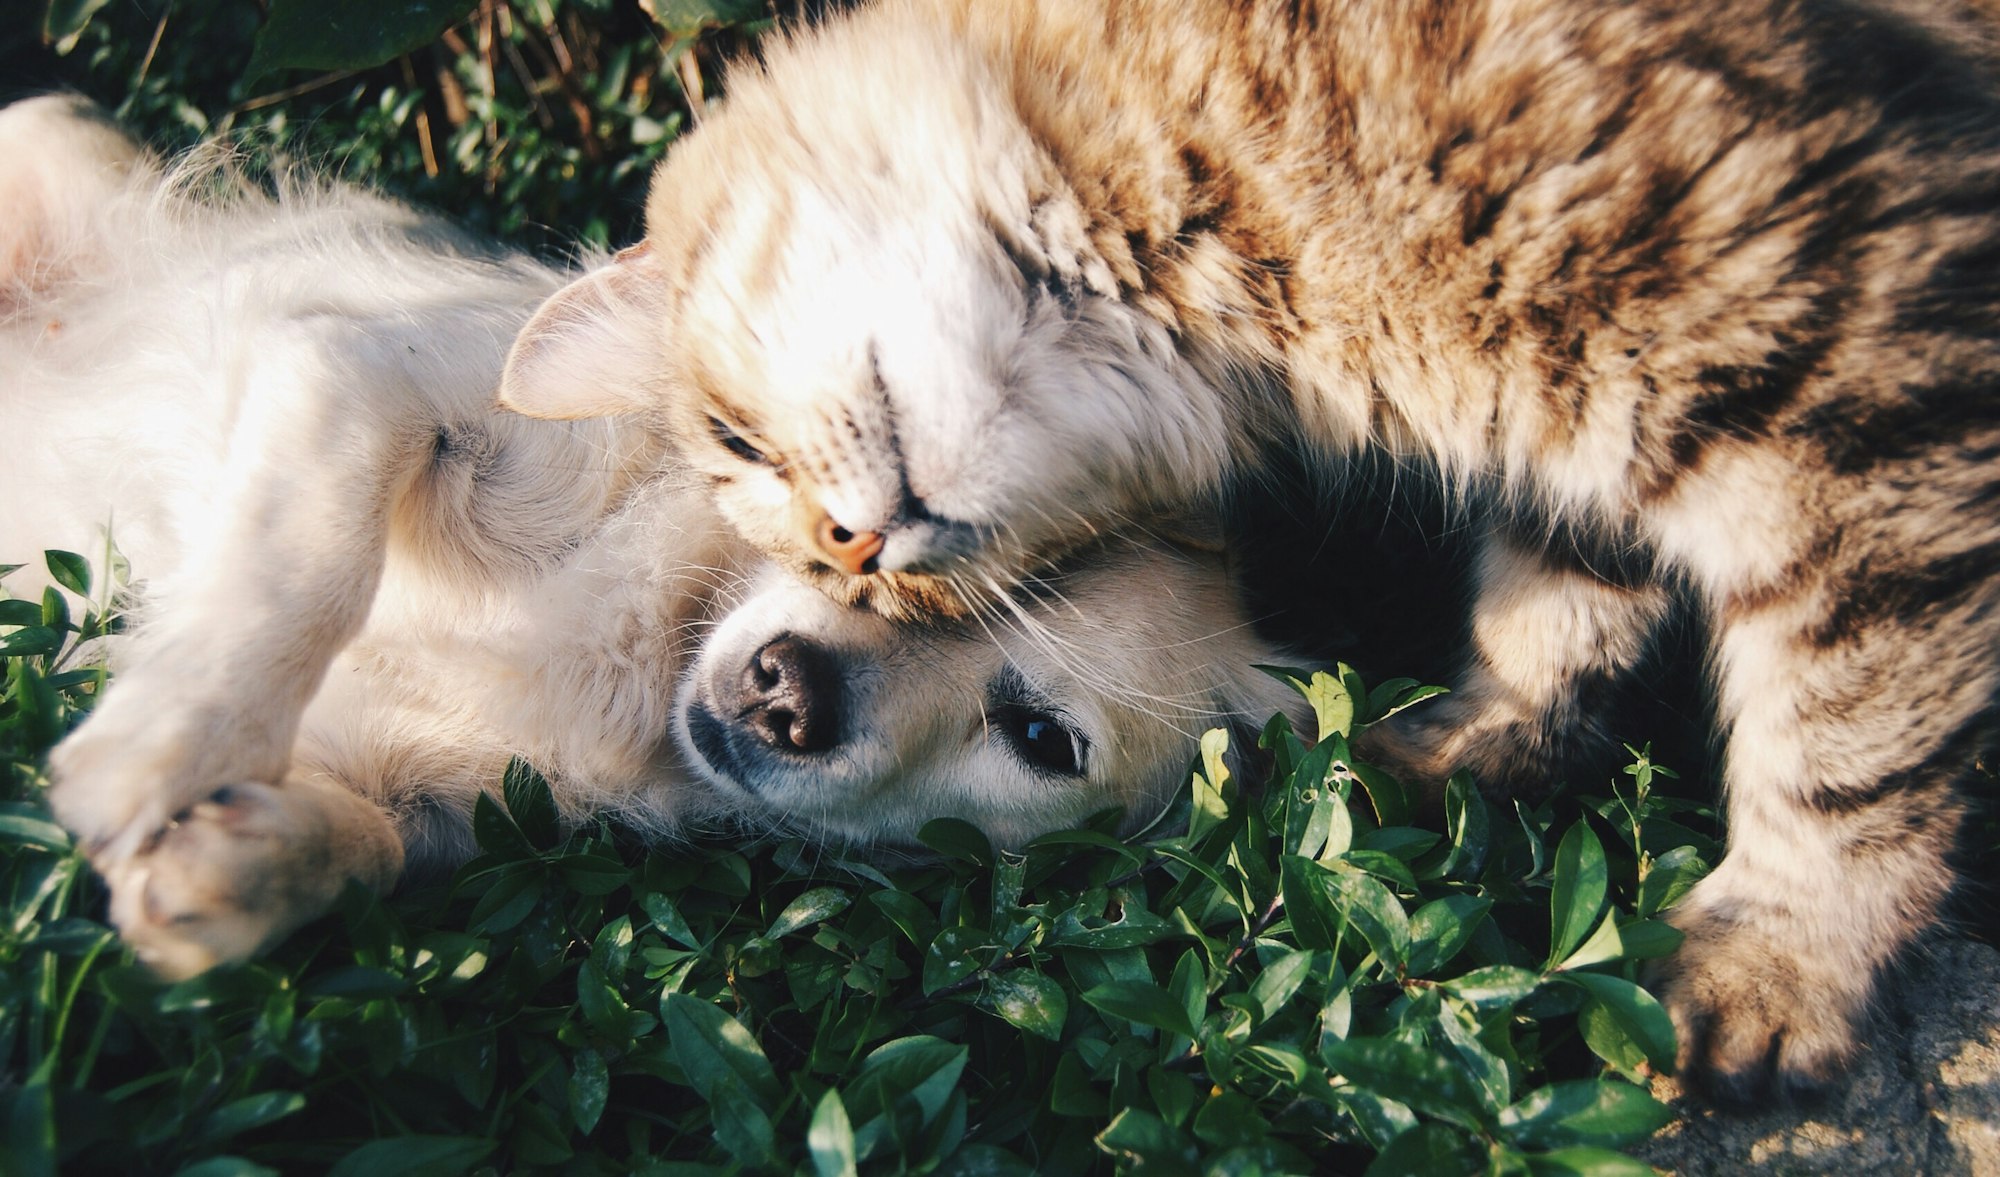 What Does Catnip Do to Dogs?